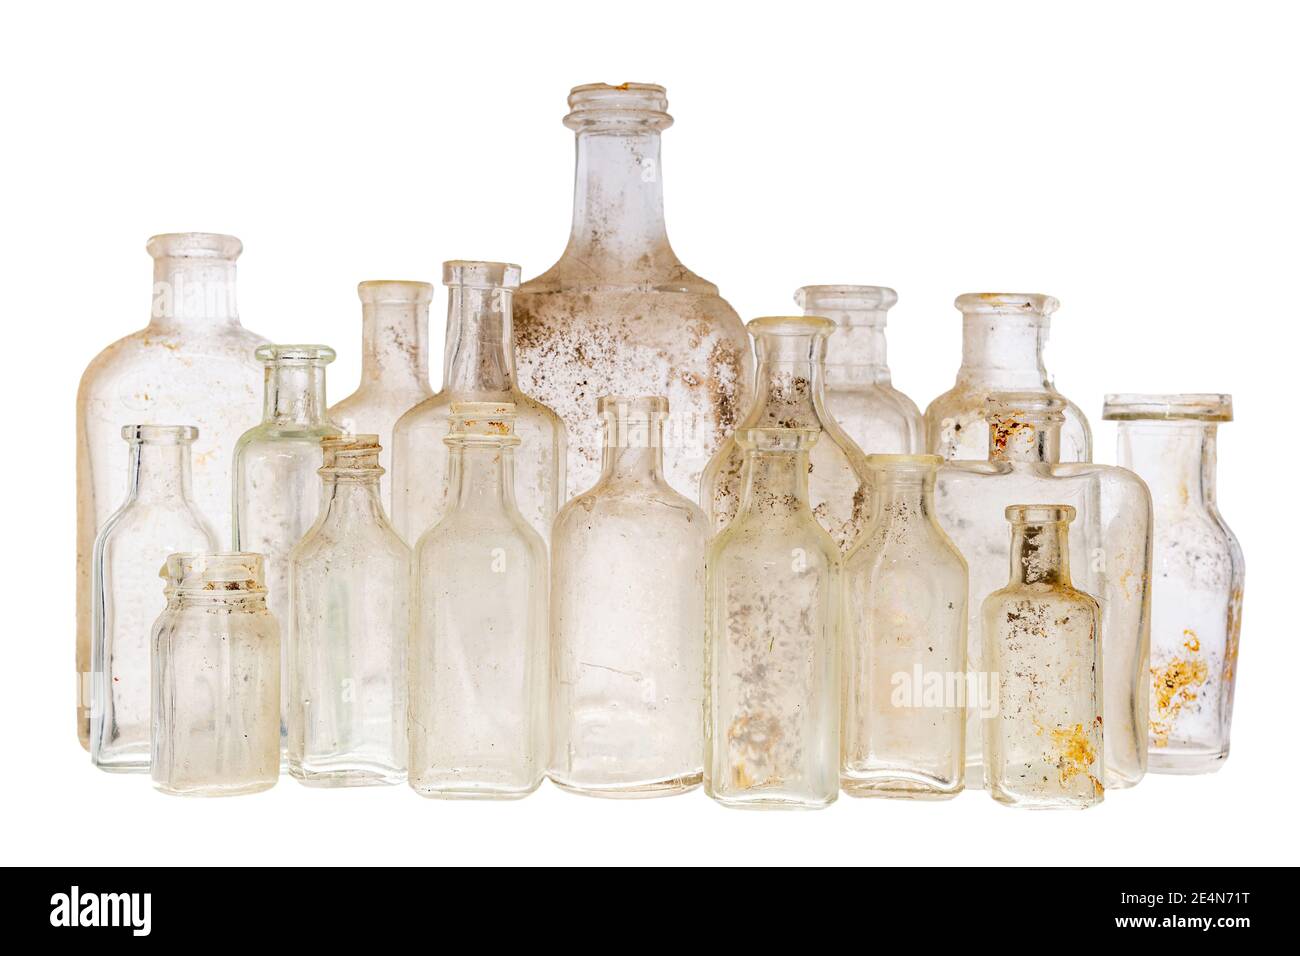 A collection of old antique bottles against a white background. There are 18 ancient bottles, and they are dirty. Focus on the front row. Stock Photo